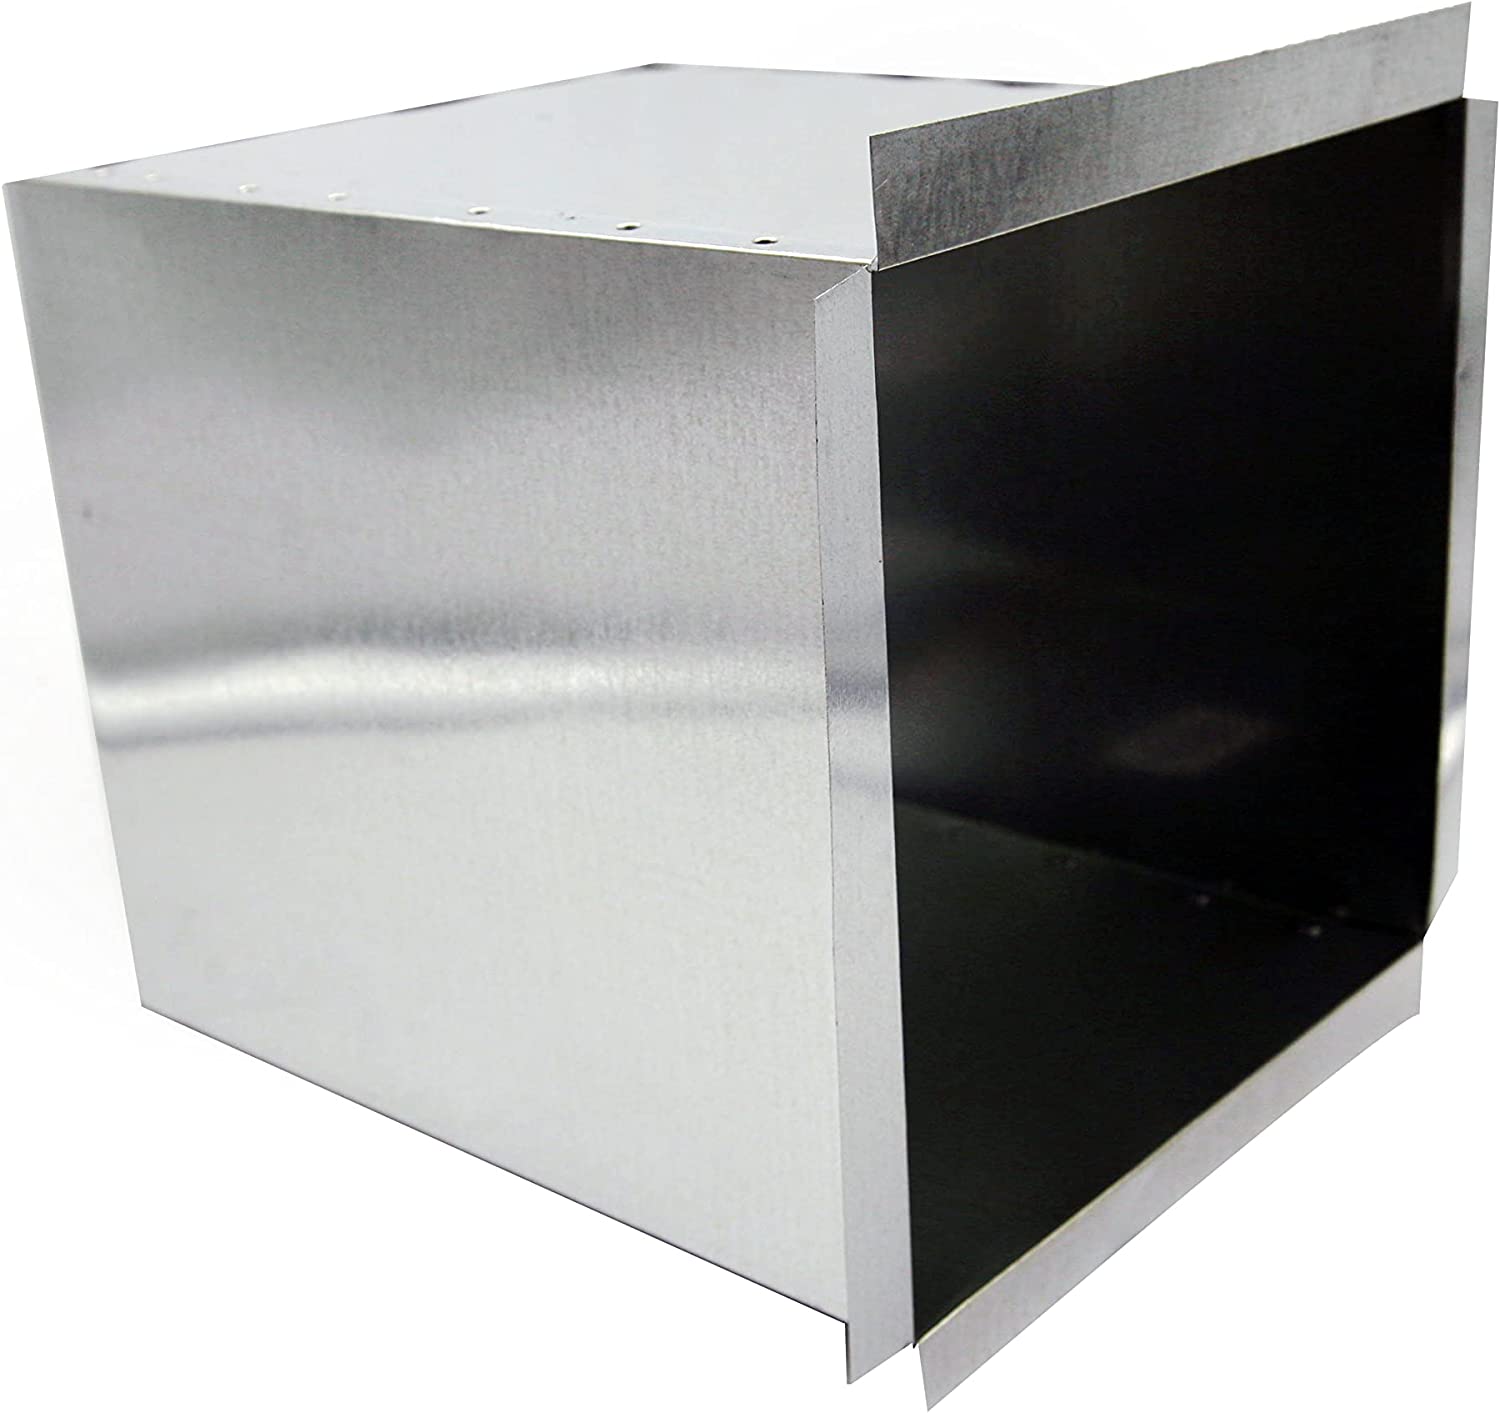 HVAC Premium Deep Blind Box | Return Air Box Register Boot 10" X 10" X 12" **| Galvanized Steel Metal Box is Compatible with Duct 12"